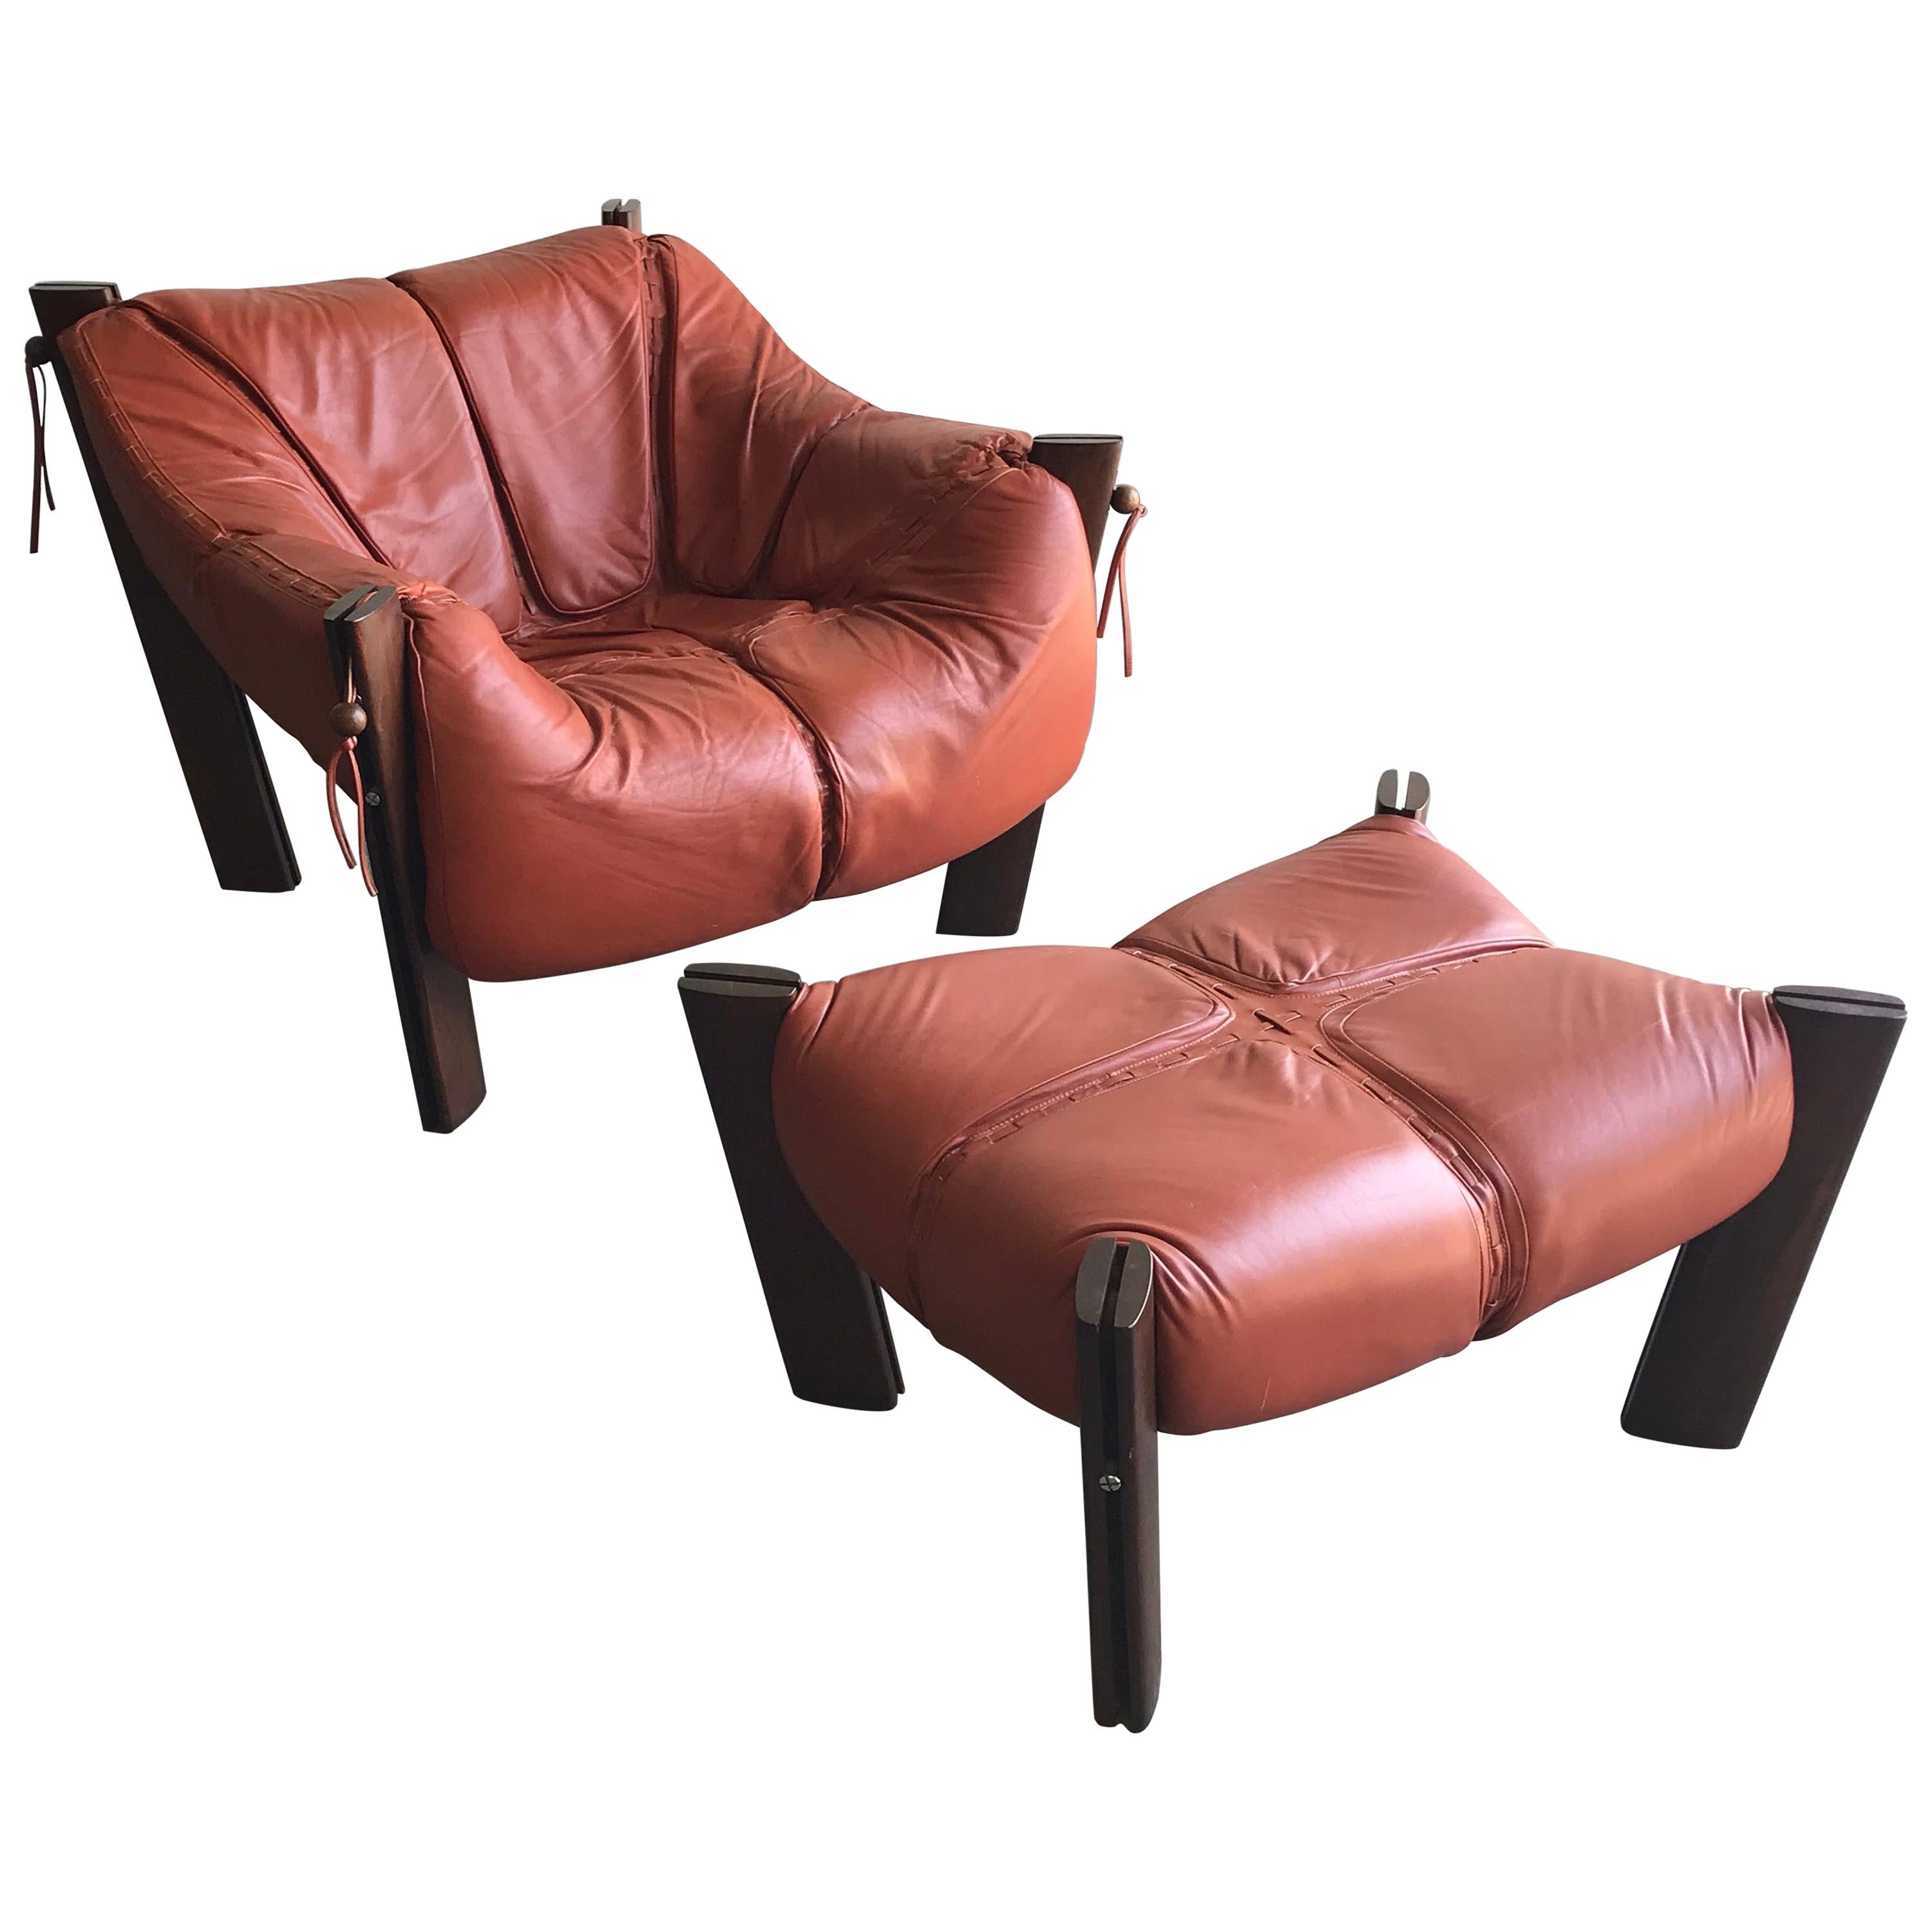 Percival Lafer MP-211 Lounge Chair and Ottoman